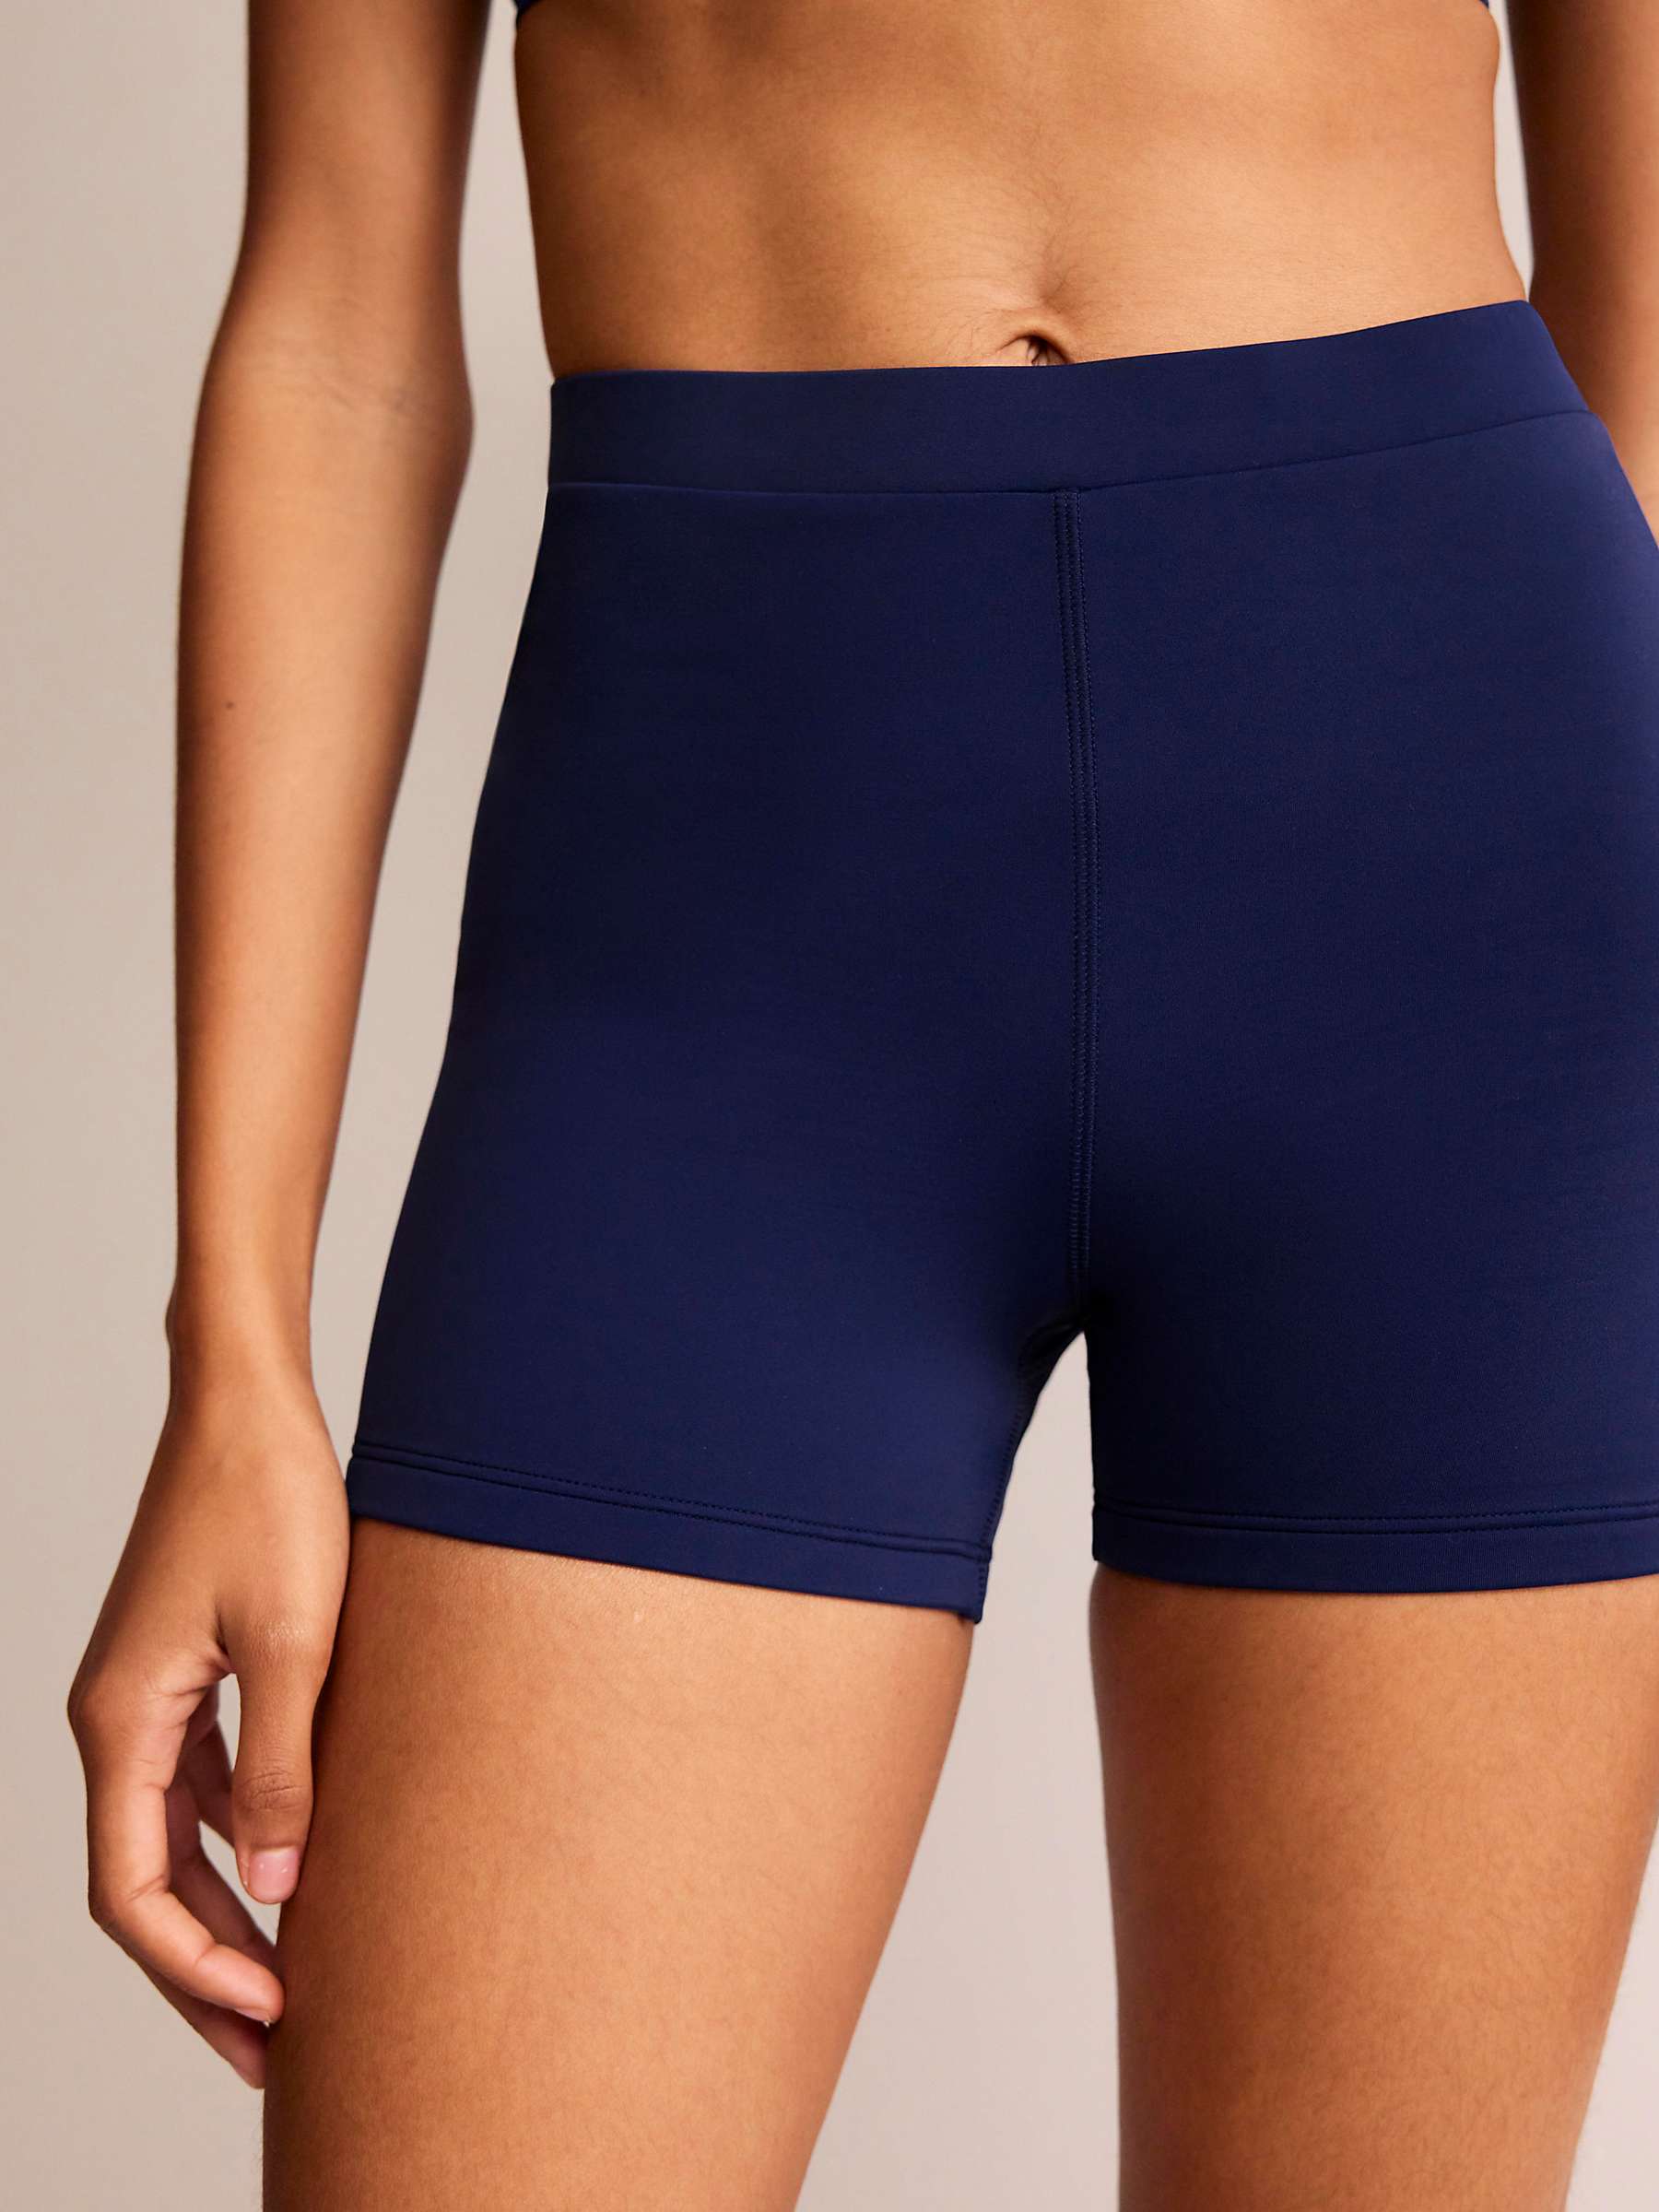 Buy Boden Swim Cycling Shorts, Navy Online at johnlewis.com